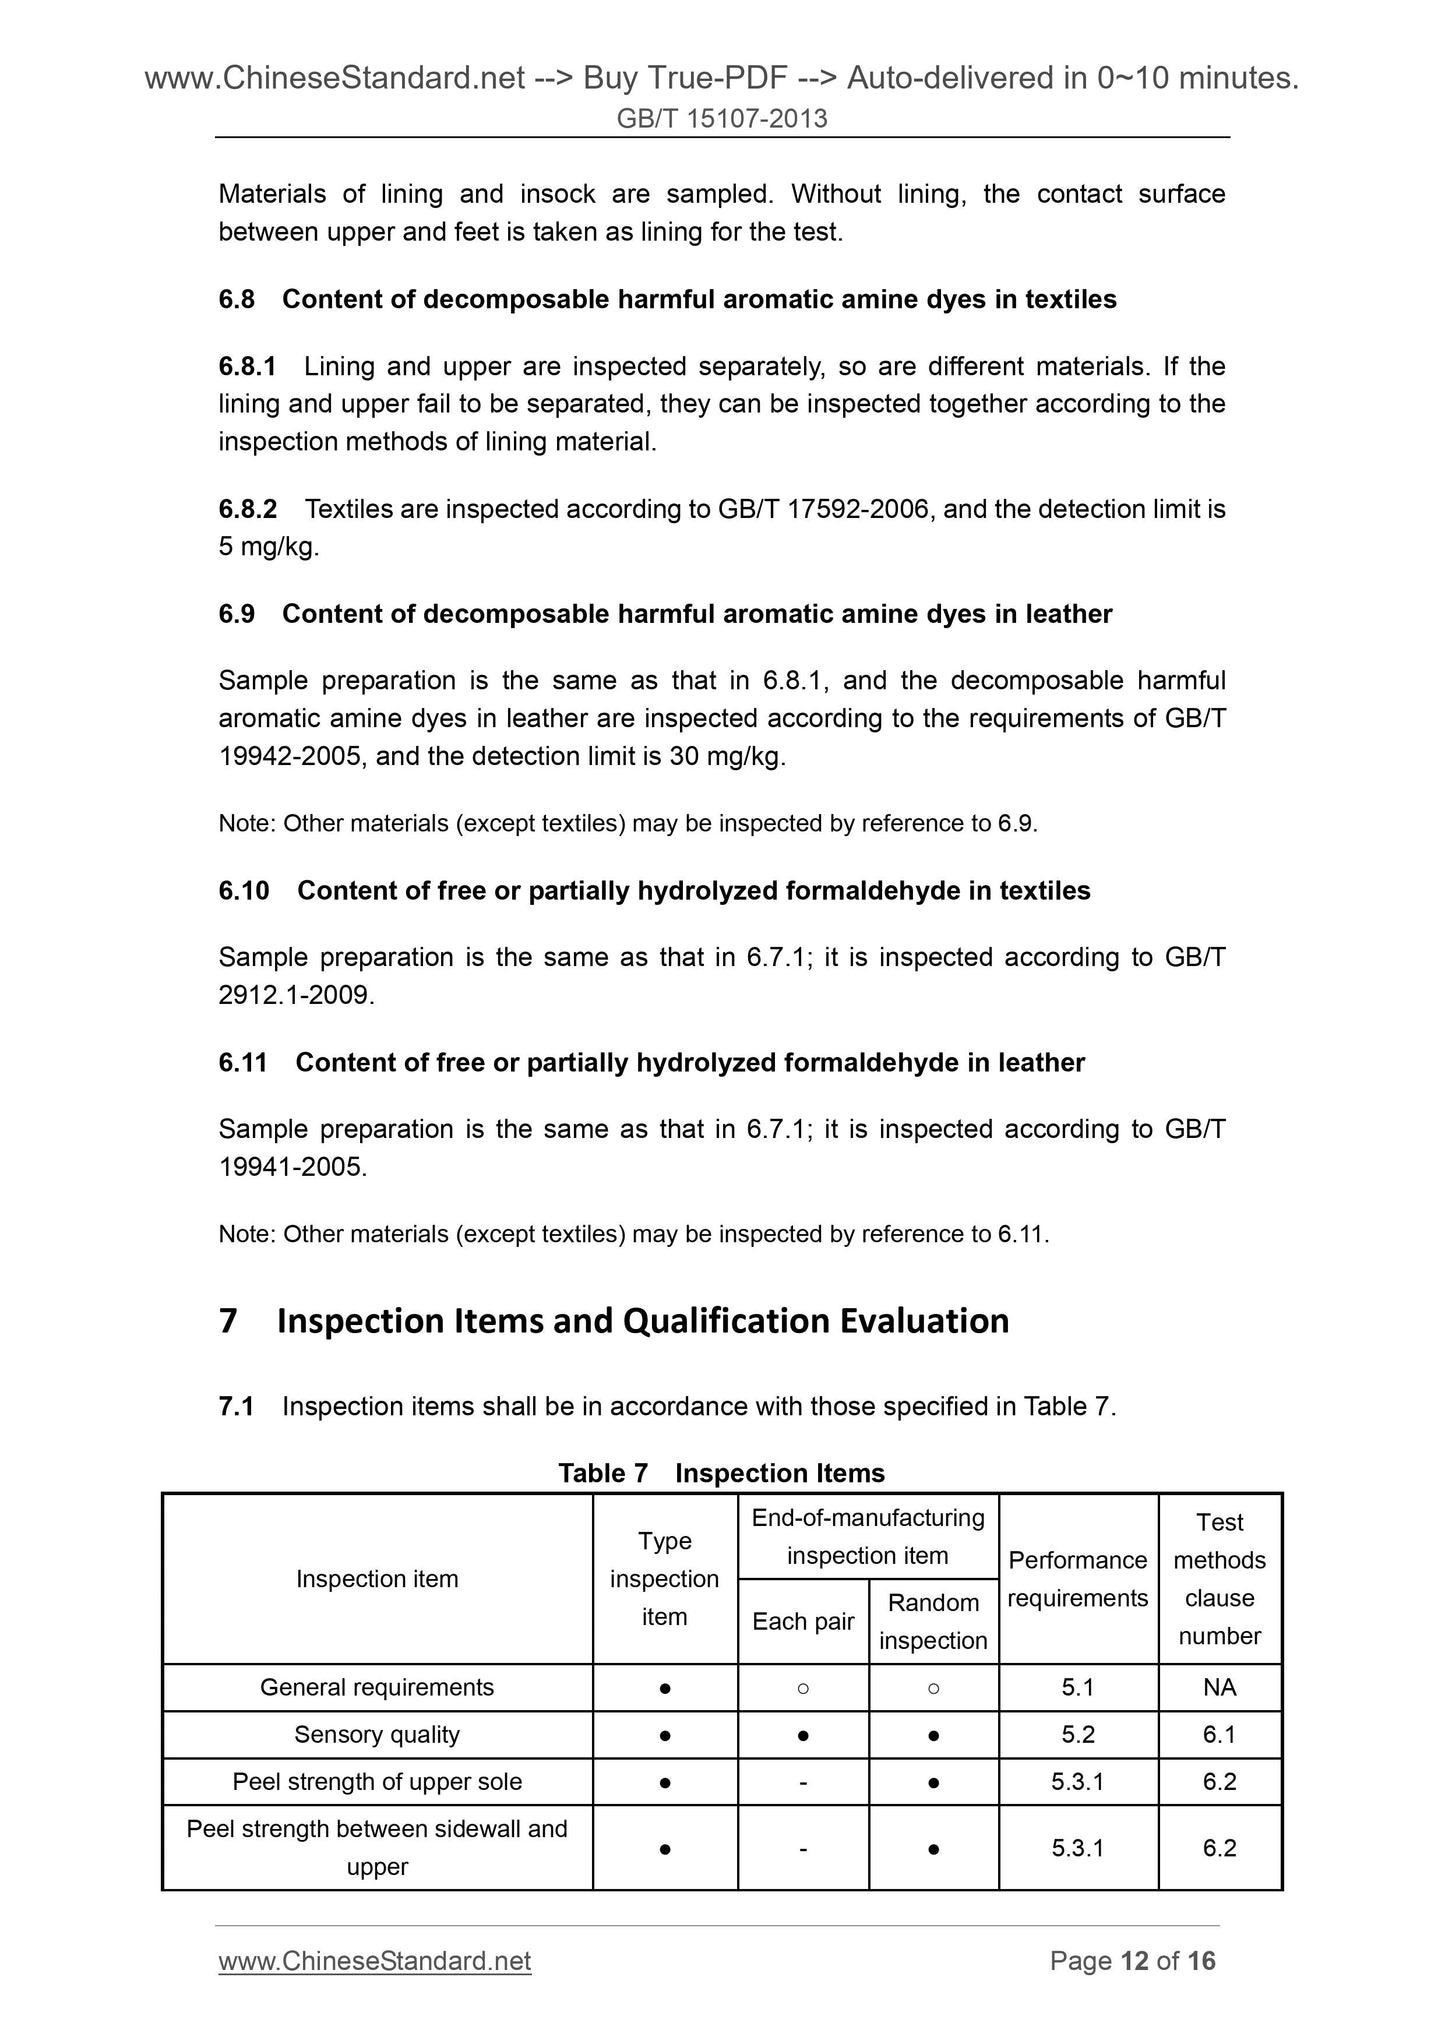 GB/T 15107-2013 Page 7